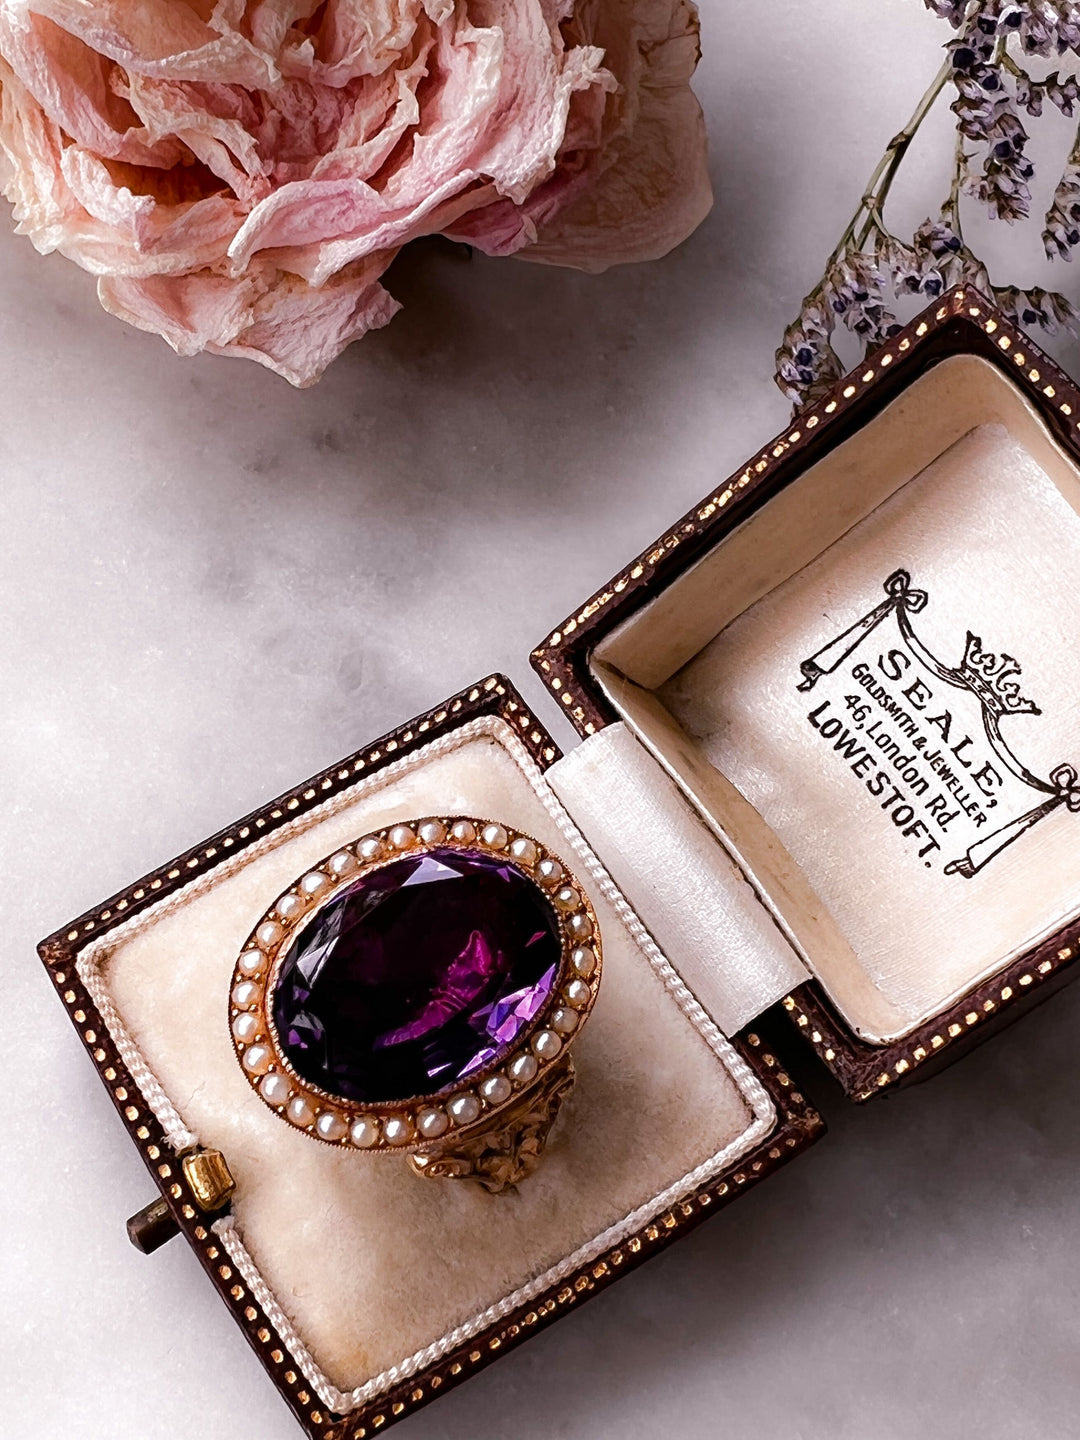 Glorious Antique Georgian Amethyst & Seed Pearl Conversion Ring